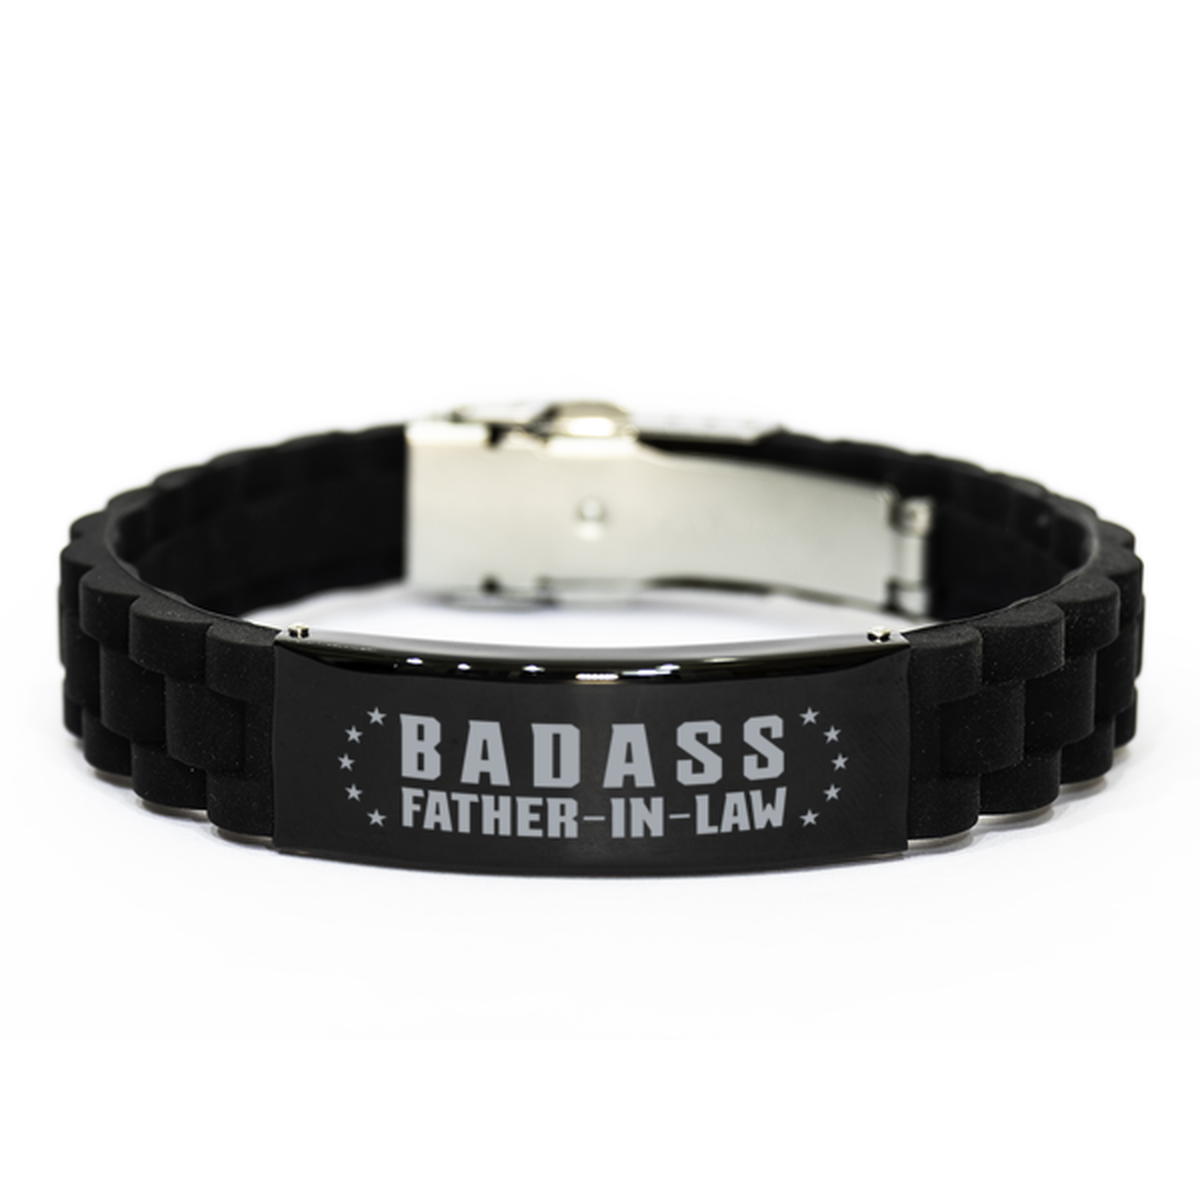 Father-in-law Black Bracelet, Badass Father-in-law, Funny Family Gifts For Father-in-law From Son Daughter